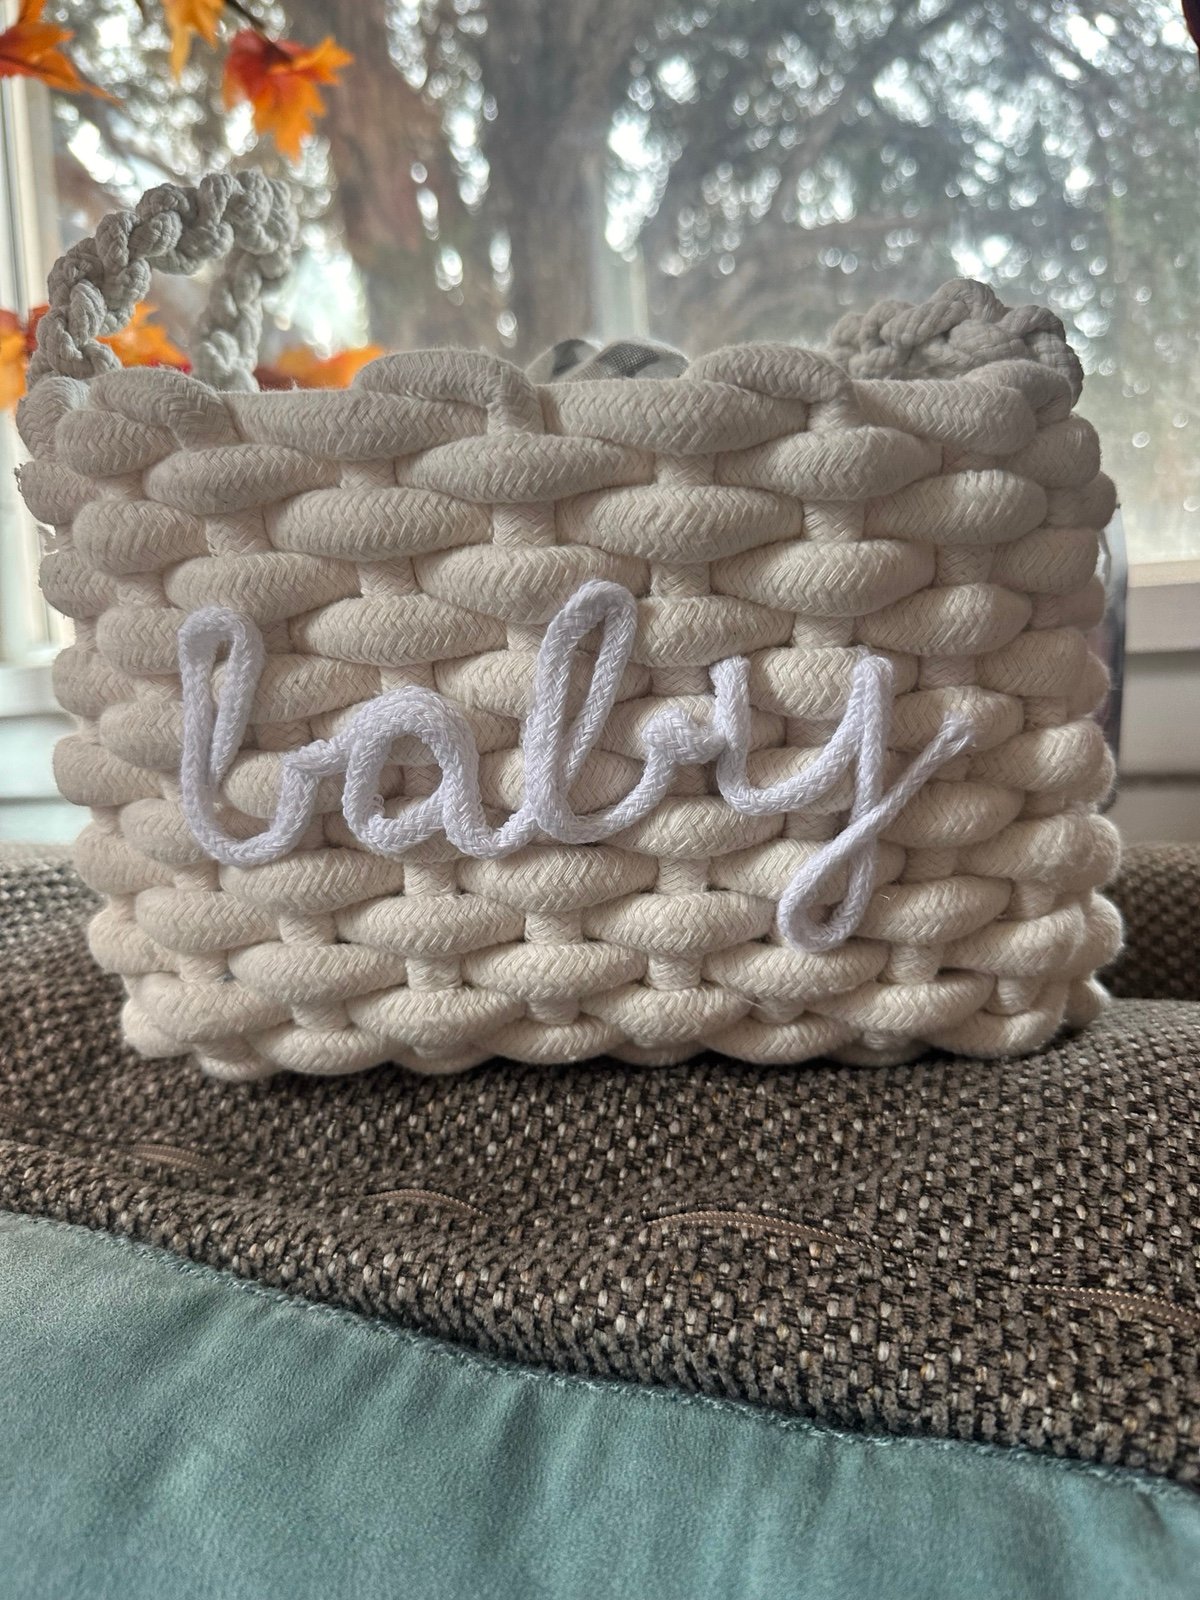 Taylor Madison soft baby basket from the Baby Collection -NWT FO4IvXlzJ